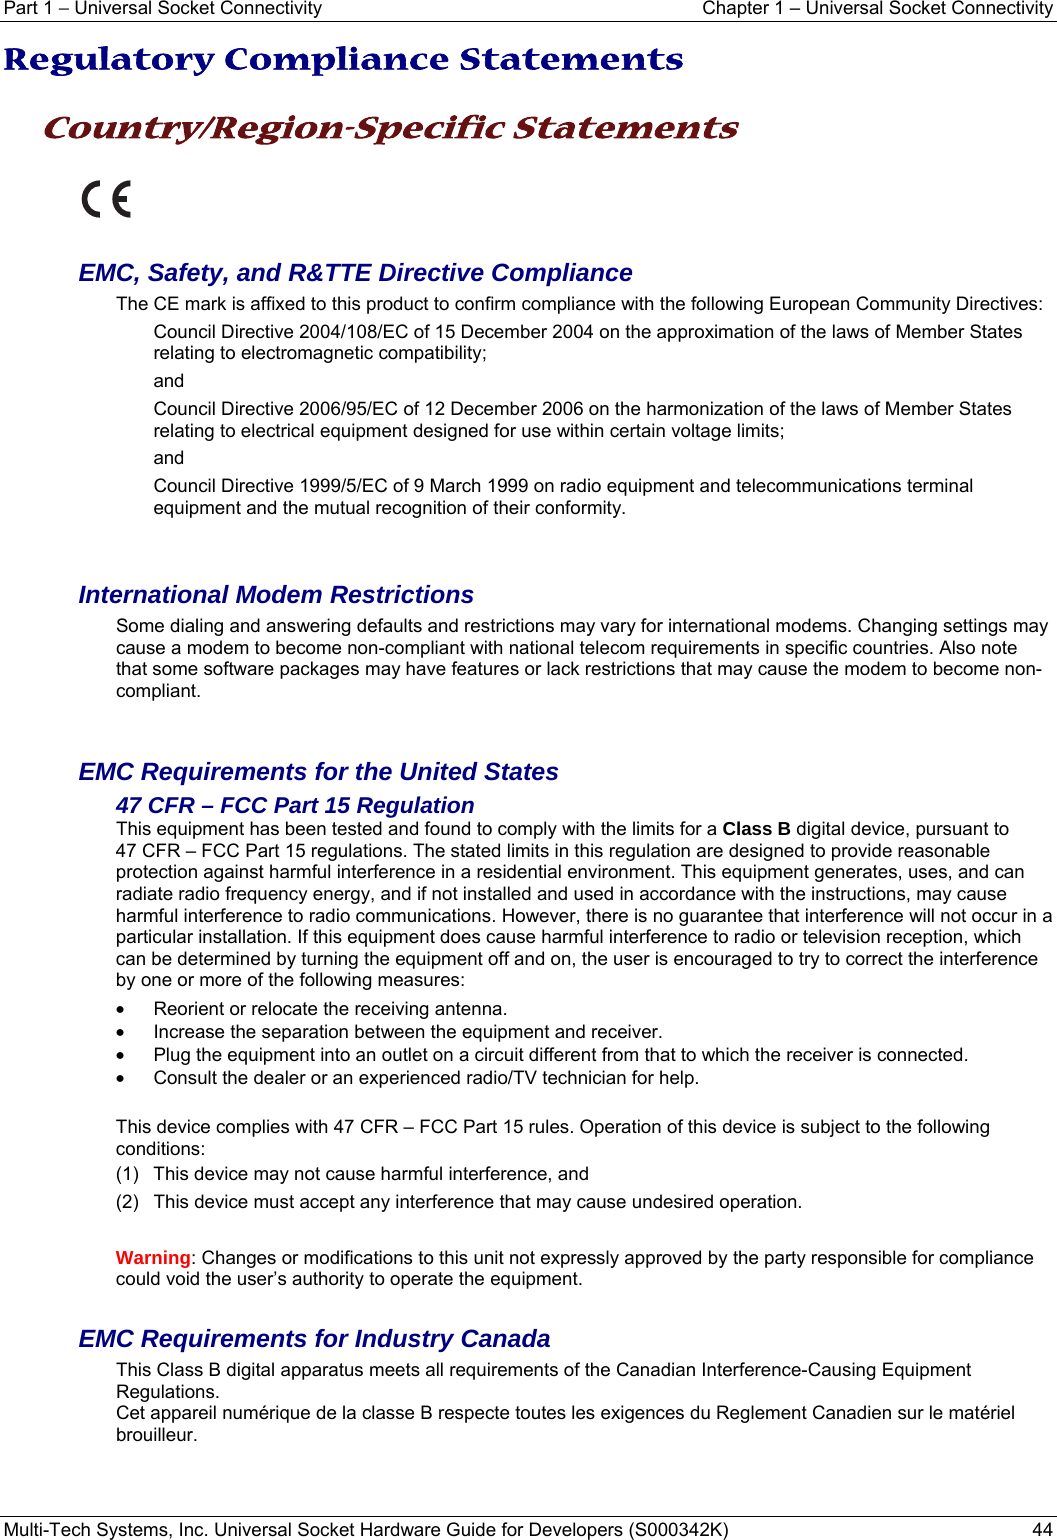 Part 1 − Universal Socket Connectivity    Chapter 1 – Universal Socket Connectivity Multi-Tech Systems, Inc. Universal Socket Hardware Guide for Developers (S000342K)  44  Regulatory Compliance Statements  Country/Region-Specific Statements    EMC, Safety, and R&amp;TTE Directive Compliance The CE mark is affixed to this product to confirm compliance with the following European Community Directives: Council Directive 2004/108/EC of 15 December 2004 on the approximation of the laws of Member States relating to electromagnetic compatibility;  and Council Directive 2006/95/EC of 12 December 2006 on the harmonization of the laws of Member States relating to electrical equipment designed for use within certain voltage limits; and Council Directive 1999/5/EC of 9 March 1999 on radio equipment and telecommunications terminal equipment and the mutual recognition of their conformity.   International Modem Restrictions Some dialing and answering defaults and restrictions may vary for international modems. Changing settings may cause a modem to become non-compliant with national telecom requirements in specific countries. Also note that some software packages may have features or lack restrictions that may cause the modem to become non-compliant.   EMC Requirements for the United States 47 CFR – FCC Part 15 Regulation This equipment has been tested and found to comply with the limits for a Class B digital device, pursuant to  47 CFR – FCC Part 15 regulations. The stated limits in this regulation are designed to provide reasonable protection against harmful interference in a residential environment. This equipment generates, uses, and can radiate radio frequency energy, and if not installed and used in accordance with the instructions, may cause harmful interference to radio communications. However, there is no guarantee that interference will not occur in a particular installation. If this equipment does cause harmful interference to radio or television reception, which can be determined by turning the equipment off and on, the user is encouraged to try to correct the interference by one or more of the following measures:  •  Reorient or relocate the receiving antenna. •  Increase the separation between the equipment and receiver. •  Plug the equipment into an outlet on a circuit different from that to which the receiver is connected. •  Consult the dealer or an experienced radio/TV technician for help.  This device complies with 47 CFR – FCC Part 15 rules. Operation of this device is subject to the following conditions:  (1)  This device may not cause harmful interference, and  (2)  This device must accept any interference that may cause undesired operation.  Warning: Changes or modifications to this unit not expressly approved by the party responsible for compliance could void the user’s authority to operate the equipment.  EMC Requirements for Industry Canada This Class B digital apparatus meets all requirements of the Canadian Interference-Causing Equipment Regulations. Cet appareil numérique de la classe B respecte toutes les exigences du Reglement Canadien sur le matériel brouilleur.   